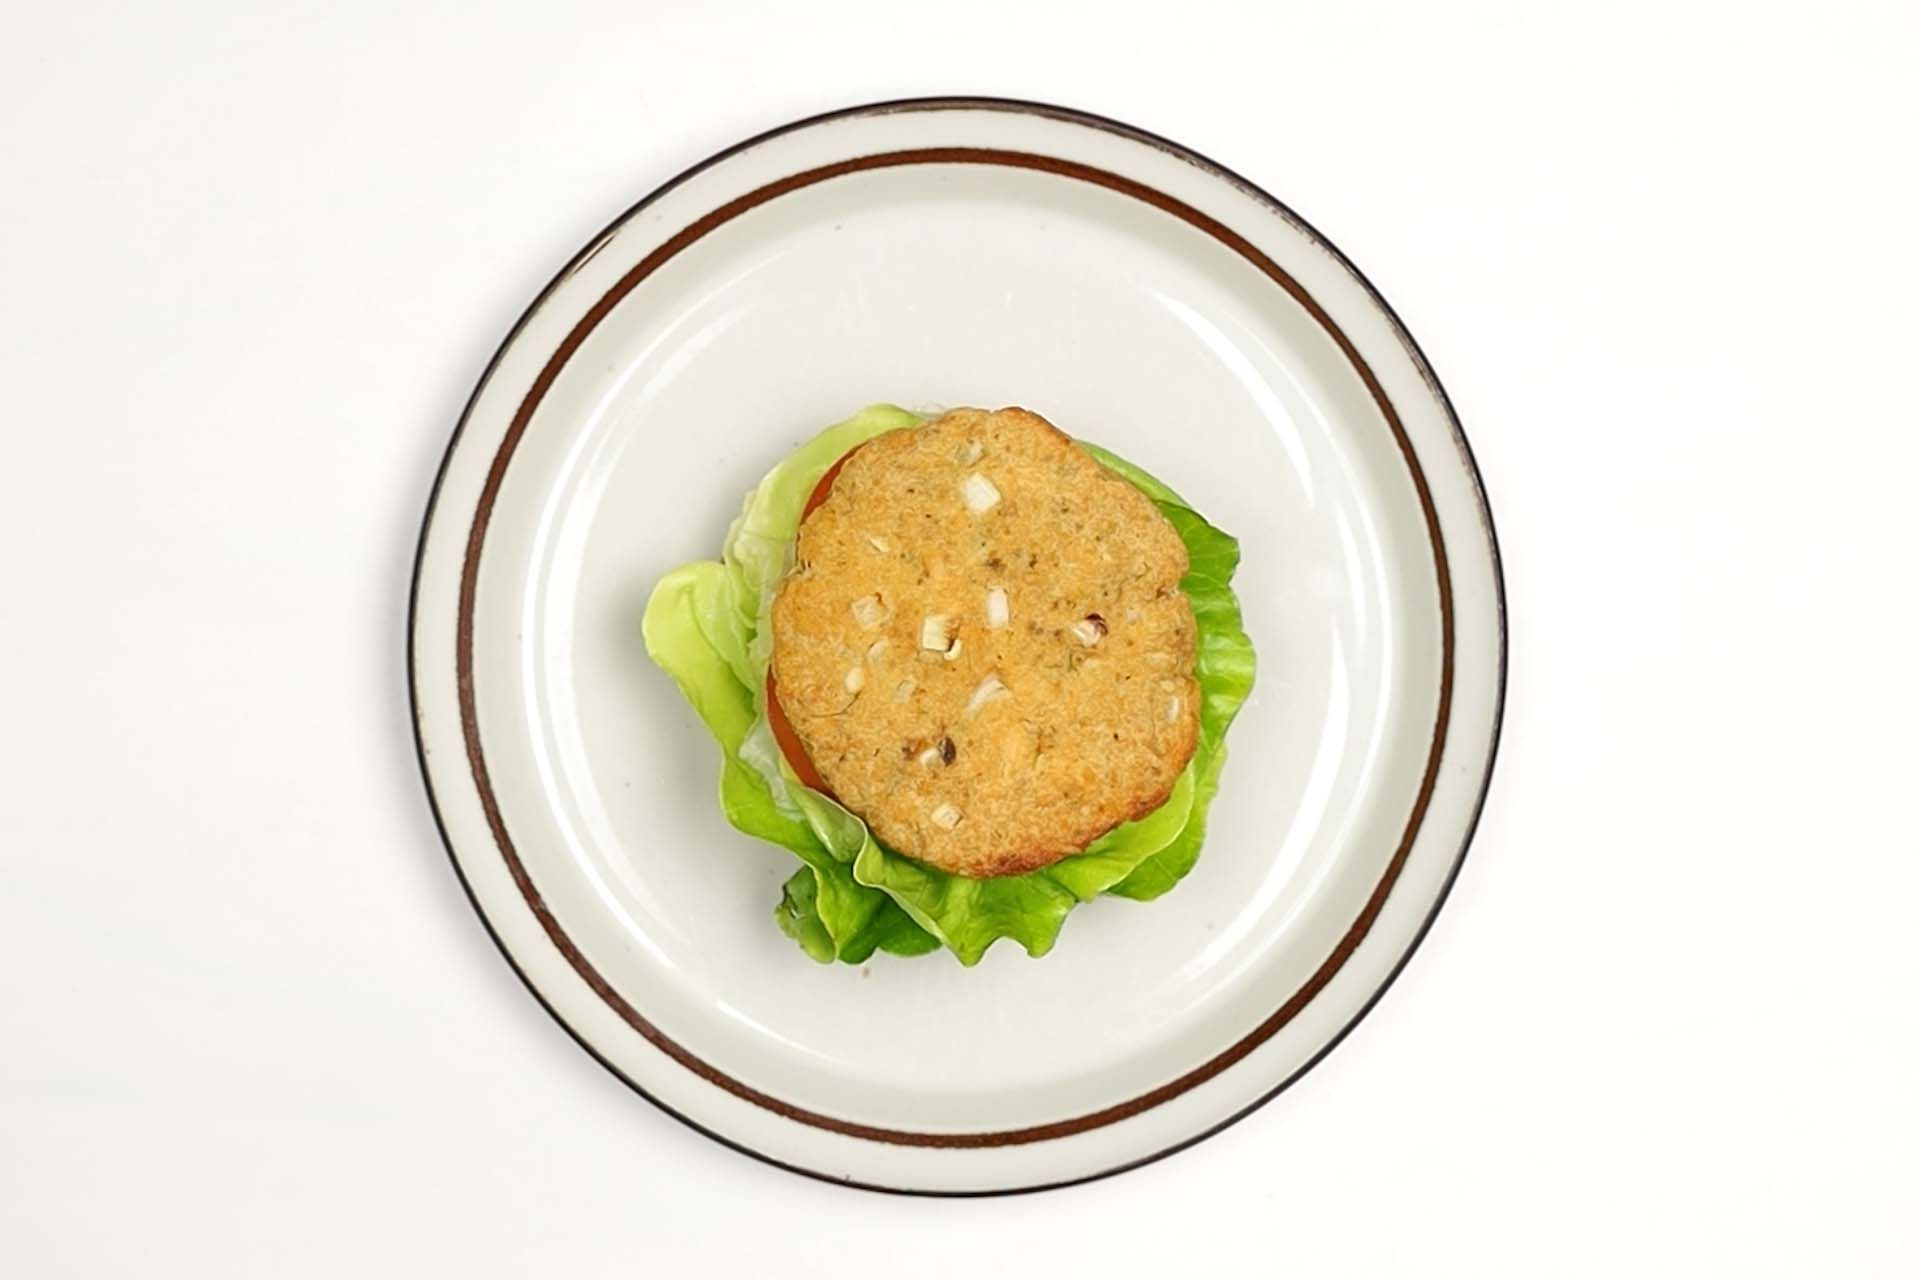 How to Make Canned Salmon Burger step 15